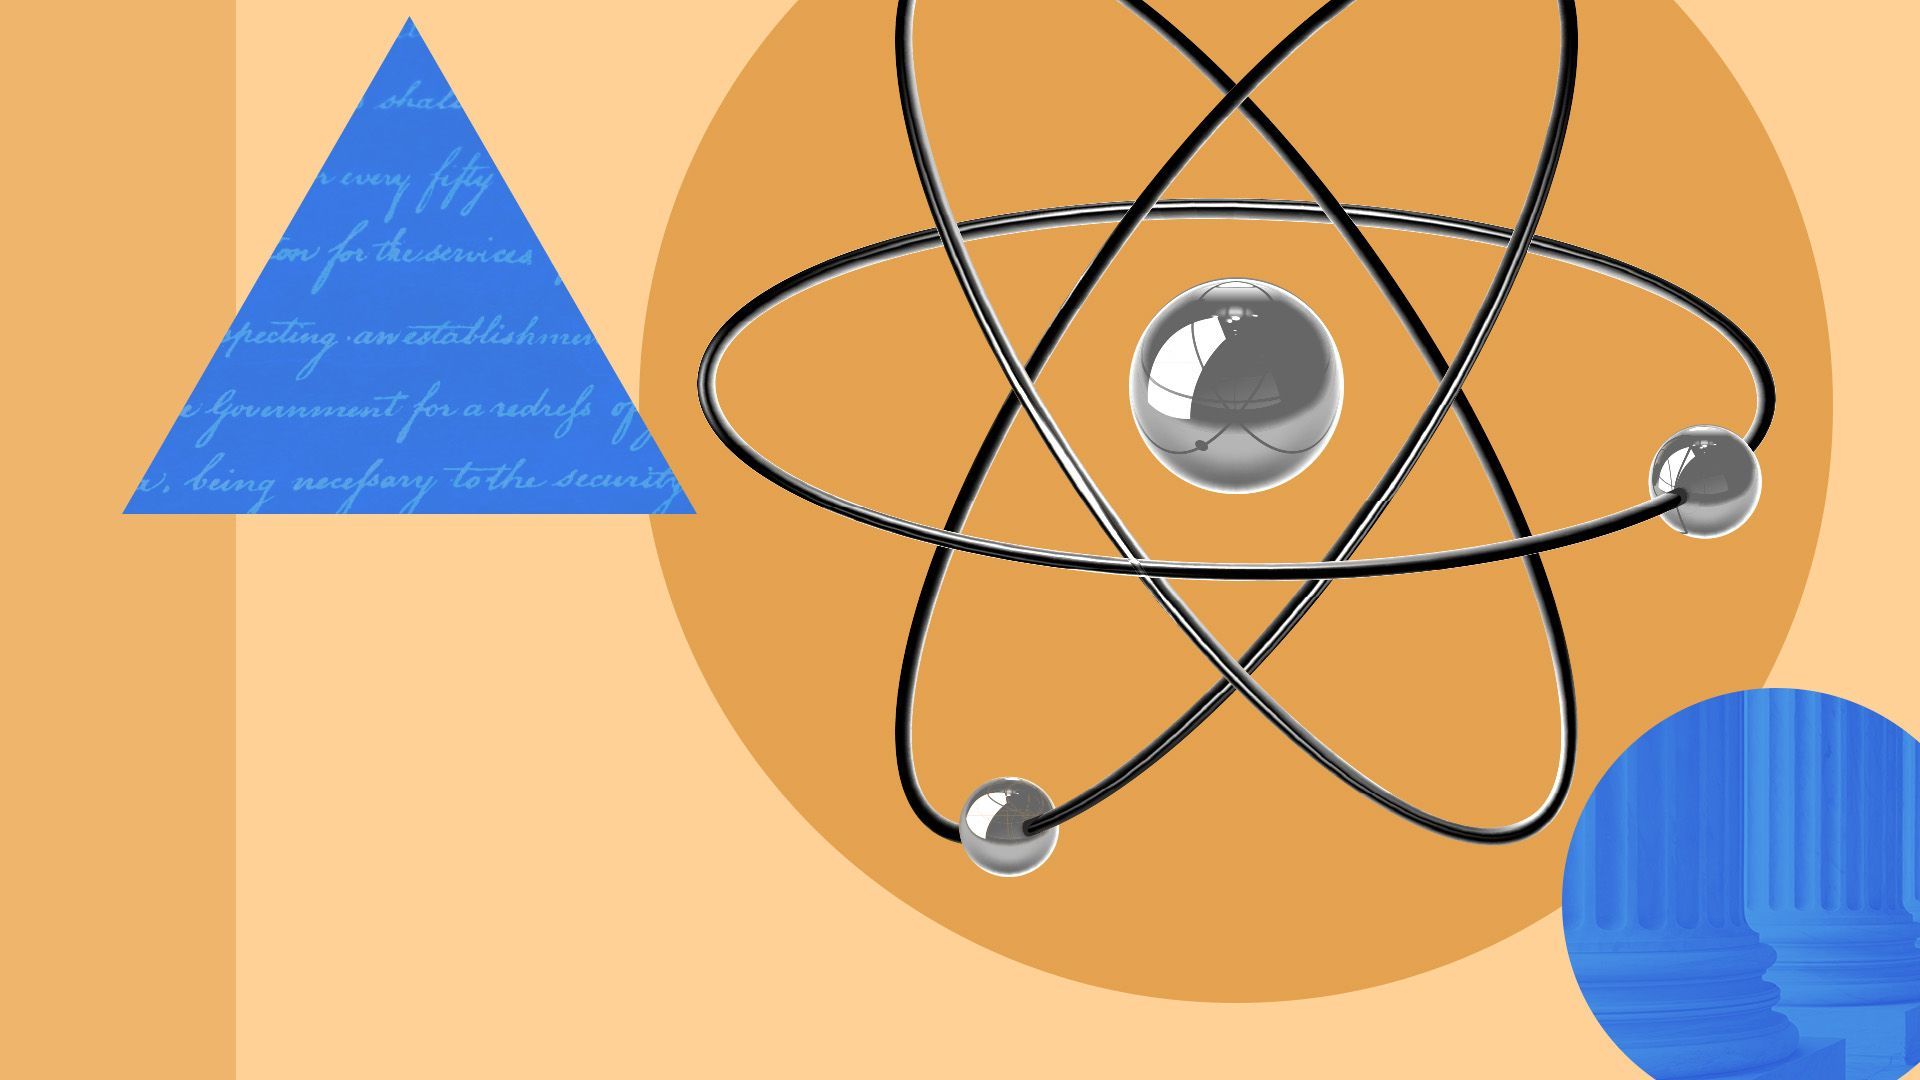 illustration of an atom surrounded by shapes and legal symbols